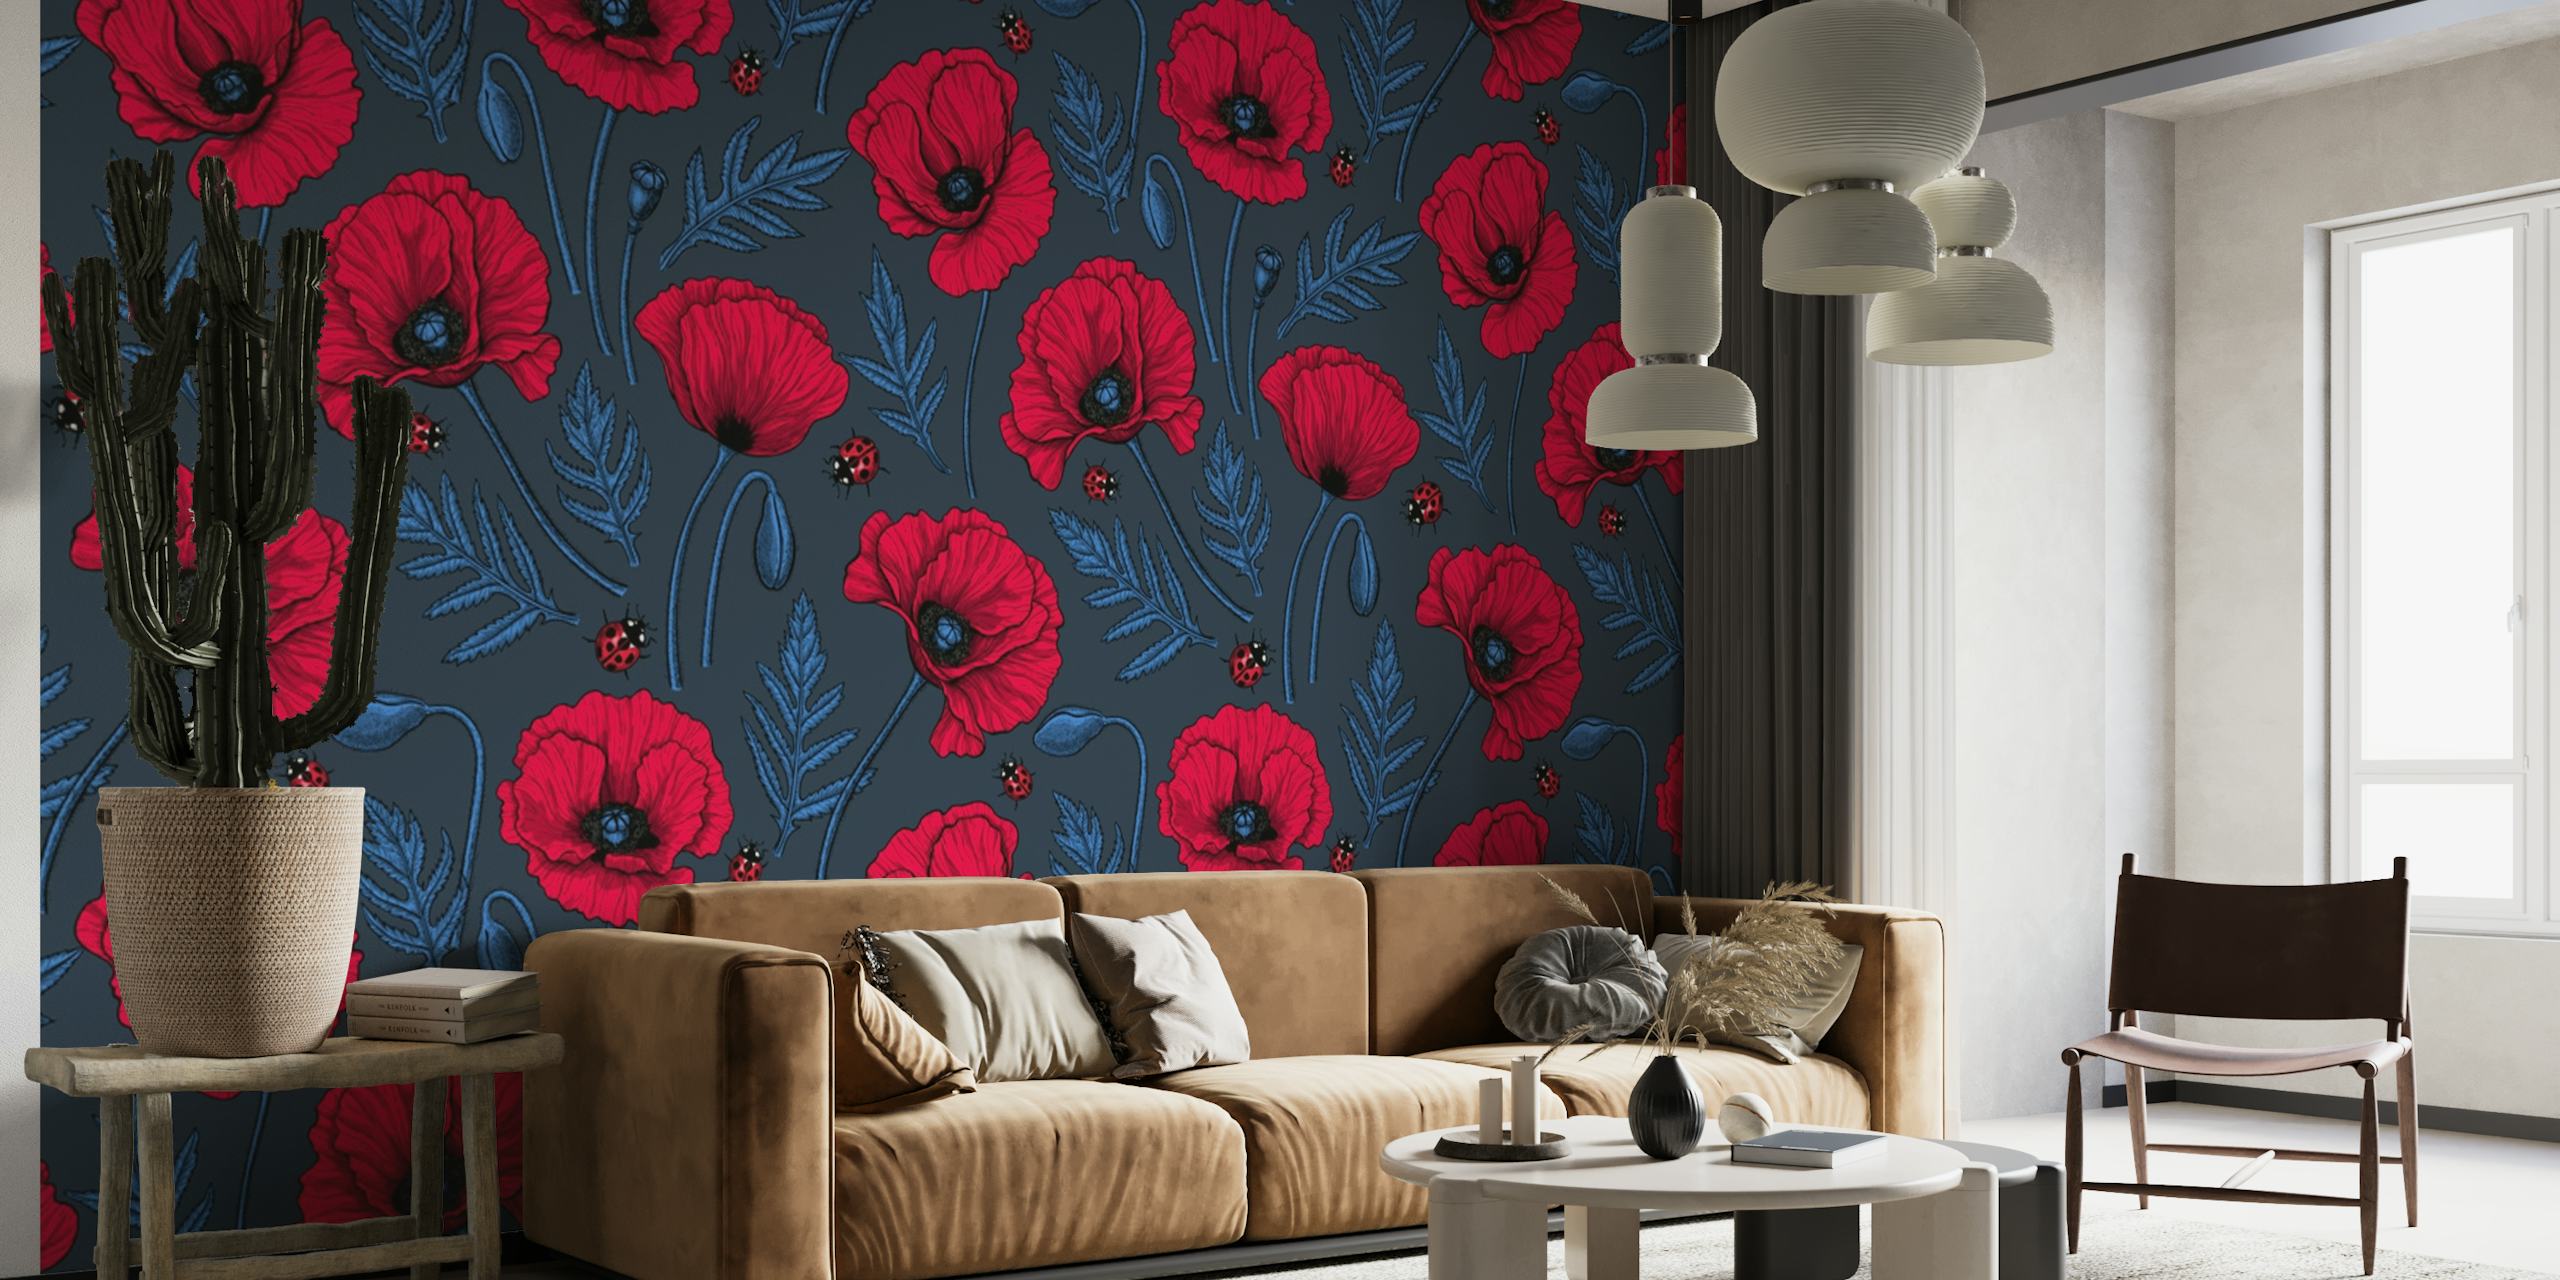 Red poppies and ladybugs papel pintado